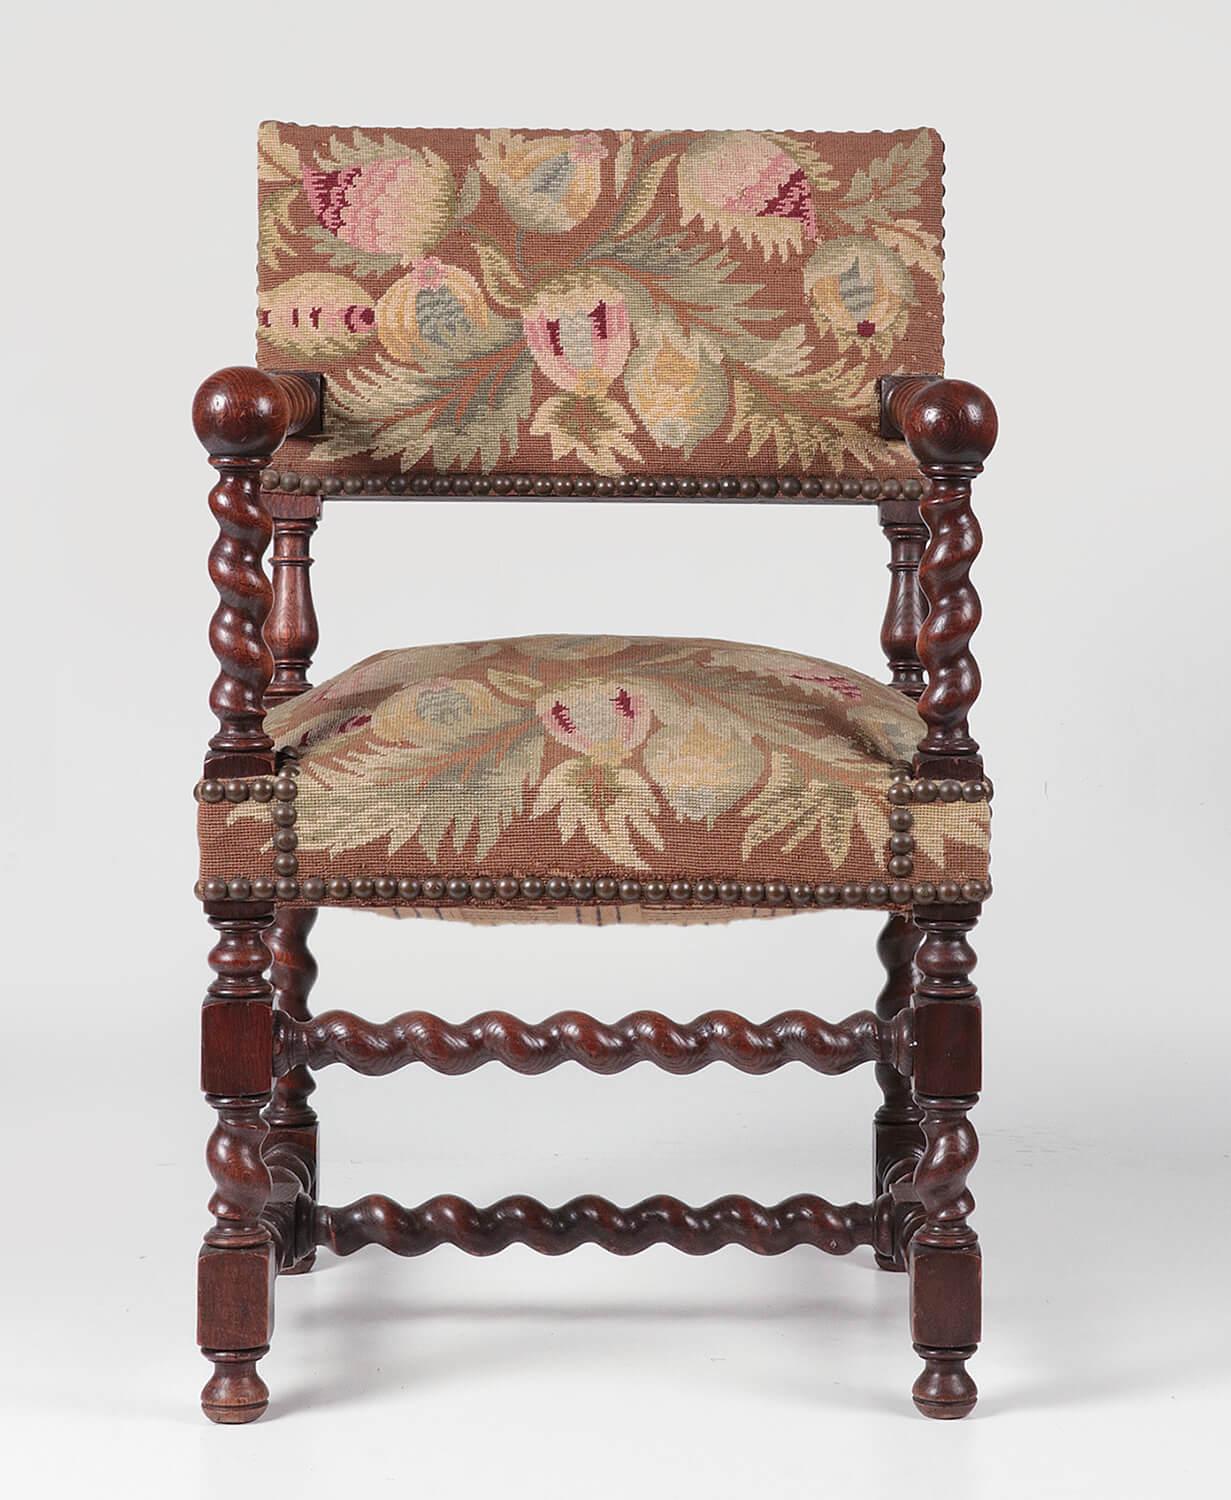 Beautiful antique oak chair with twisted elements and a woolen petit point upholstery. The wood has a beautiful vivid patina. The upholstery is completely fine. The chair is sturdy and robust.